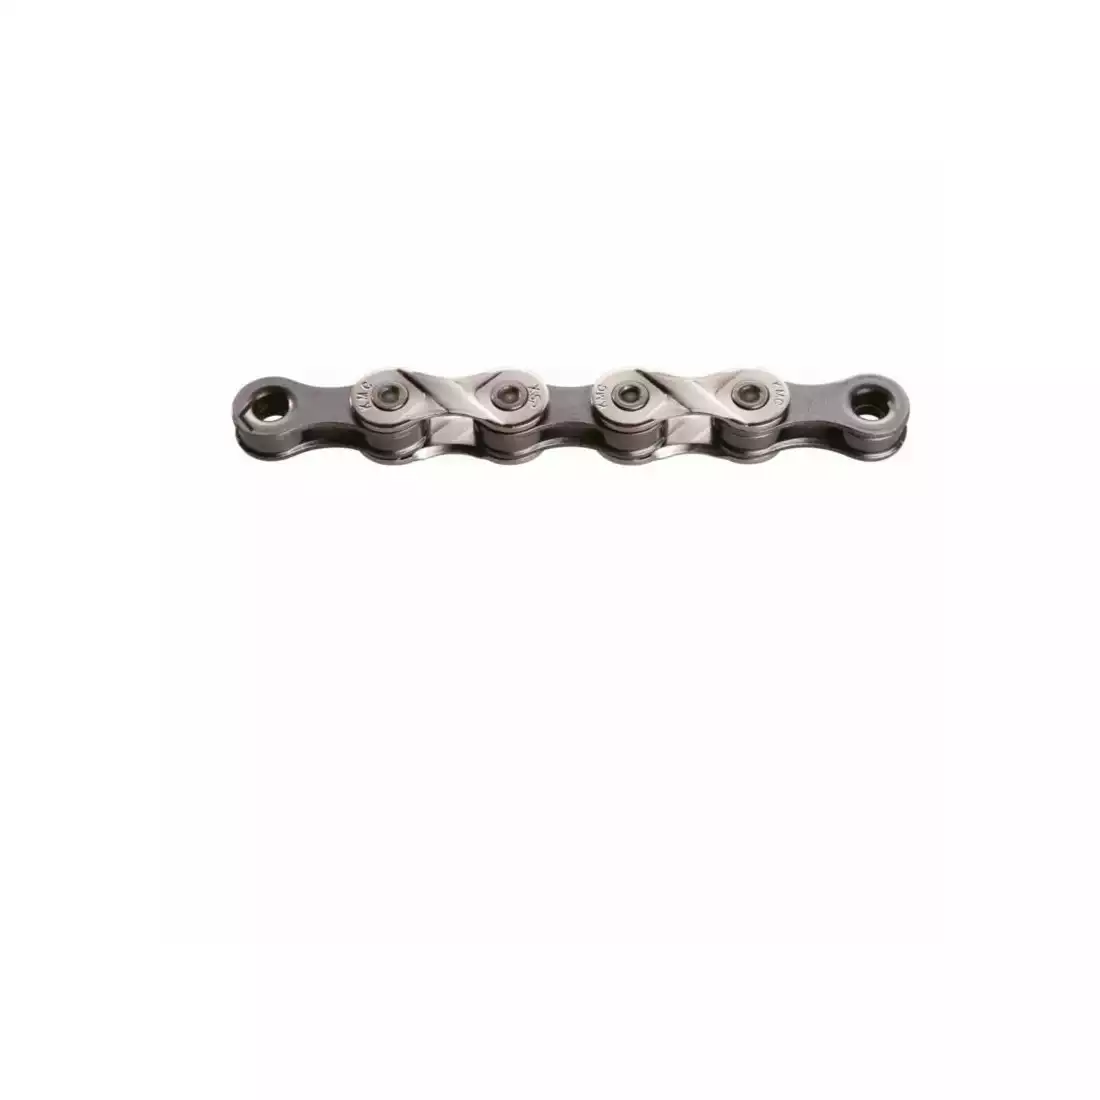 KMC X8 bicycle chain, 8 rows, 116 links, silver gray